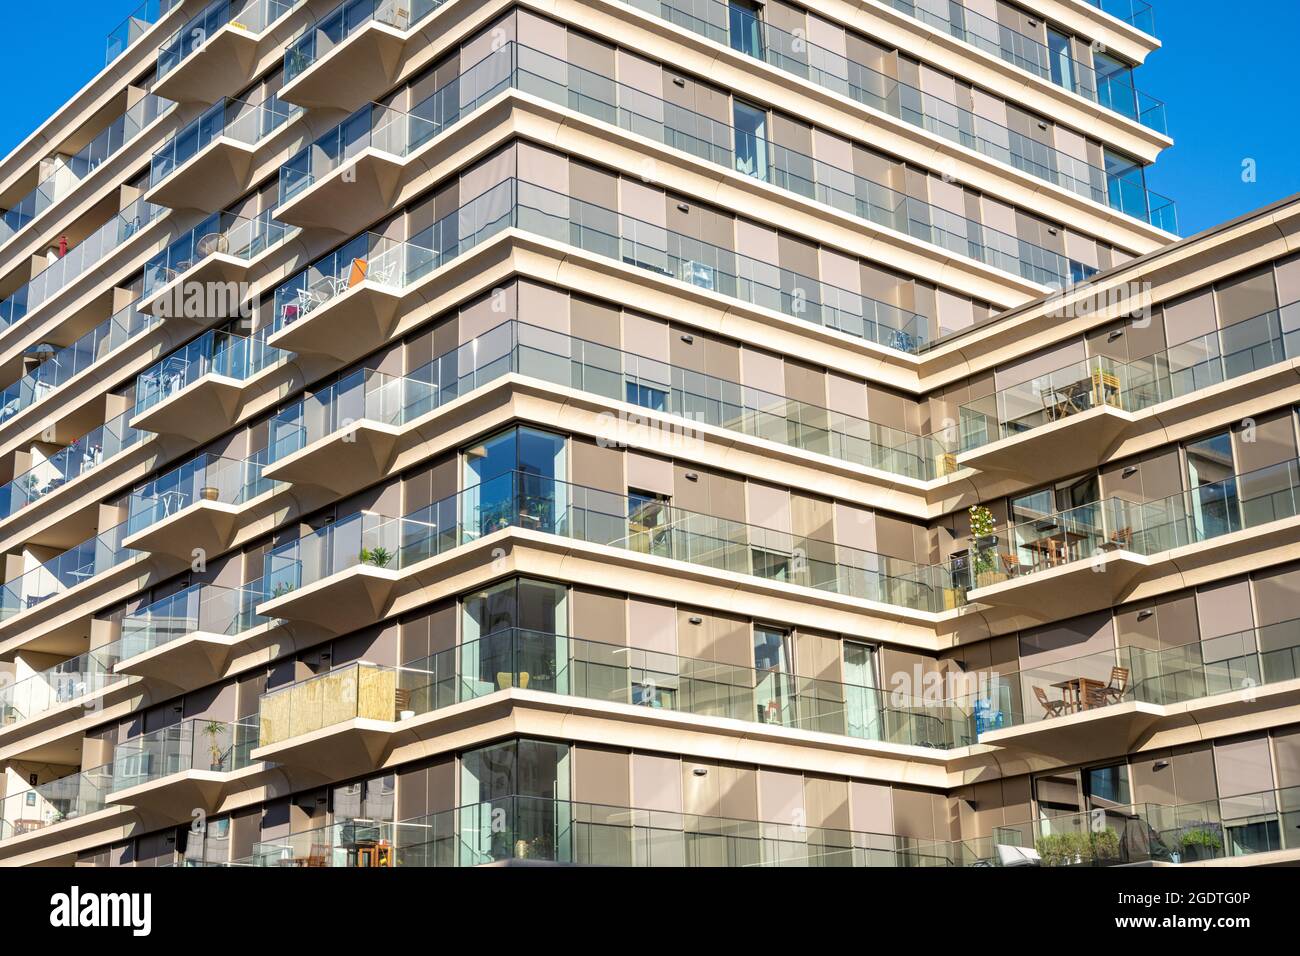 Modern apartment building with big windows seen in Berlin, Germany Stock Photo